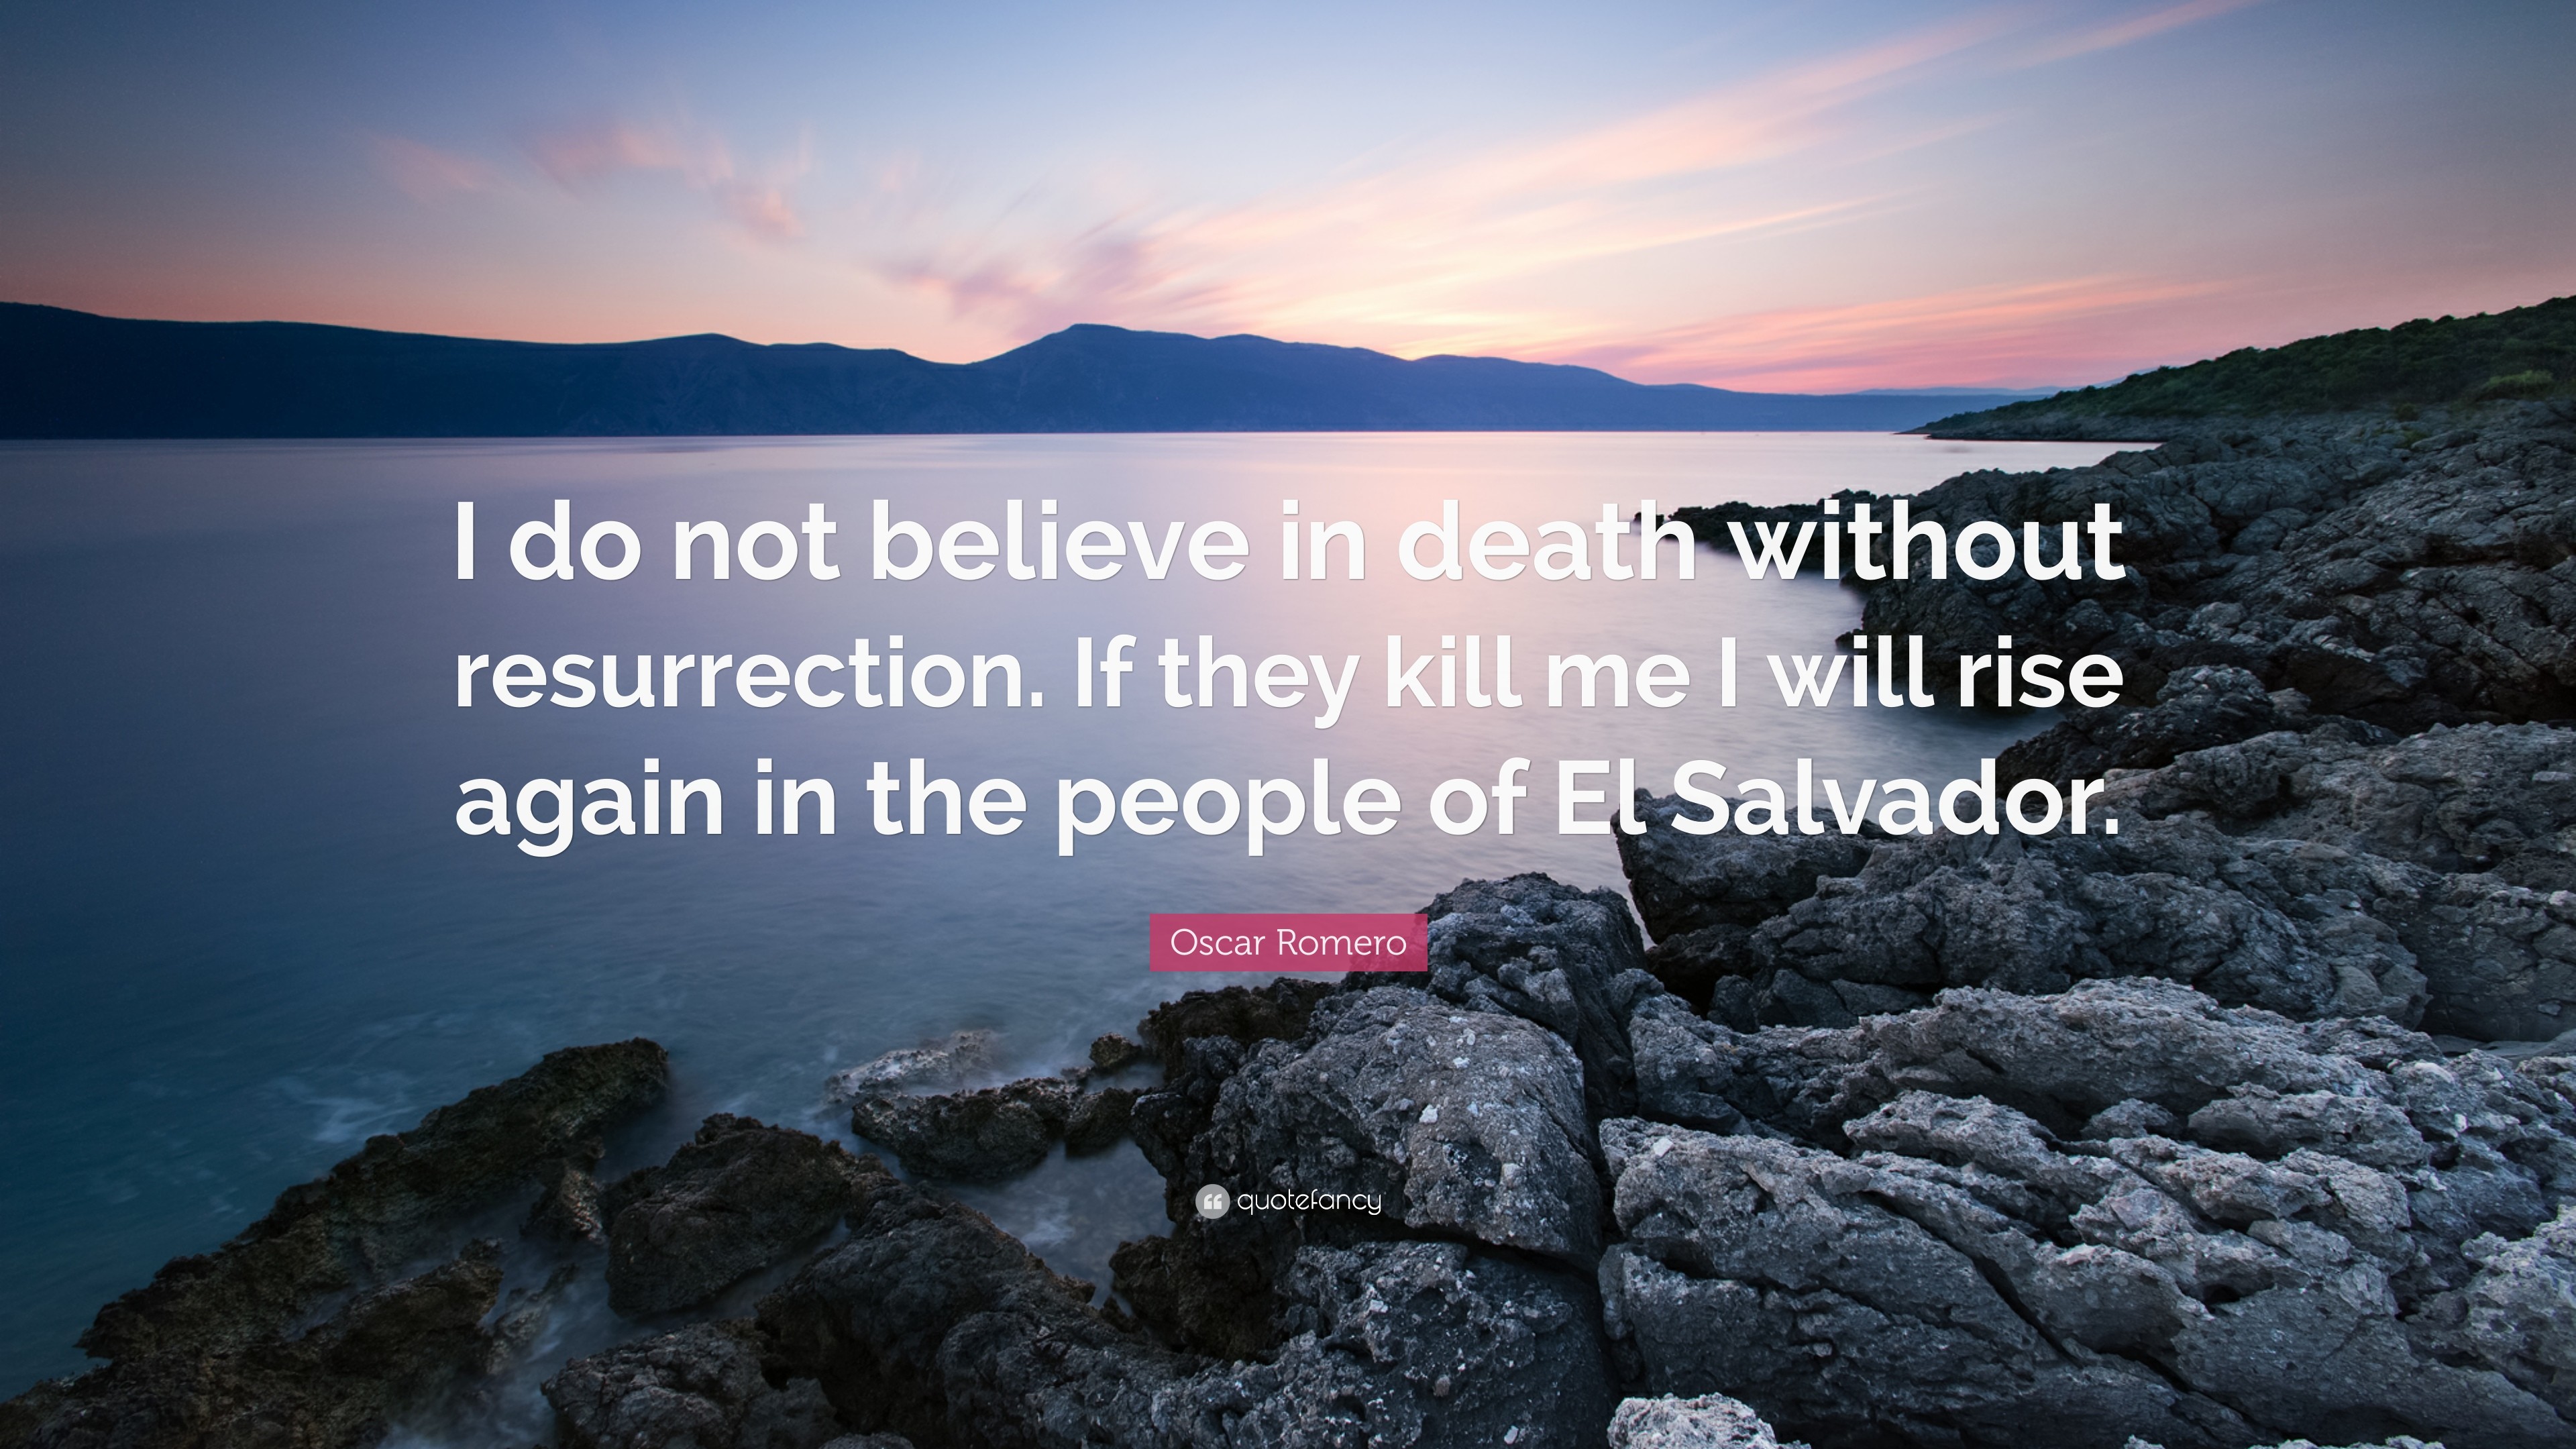 3840x2160 Oscar Romero Quote: “I do not believe in death without resurrection. If they